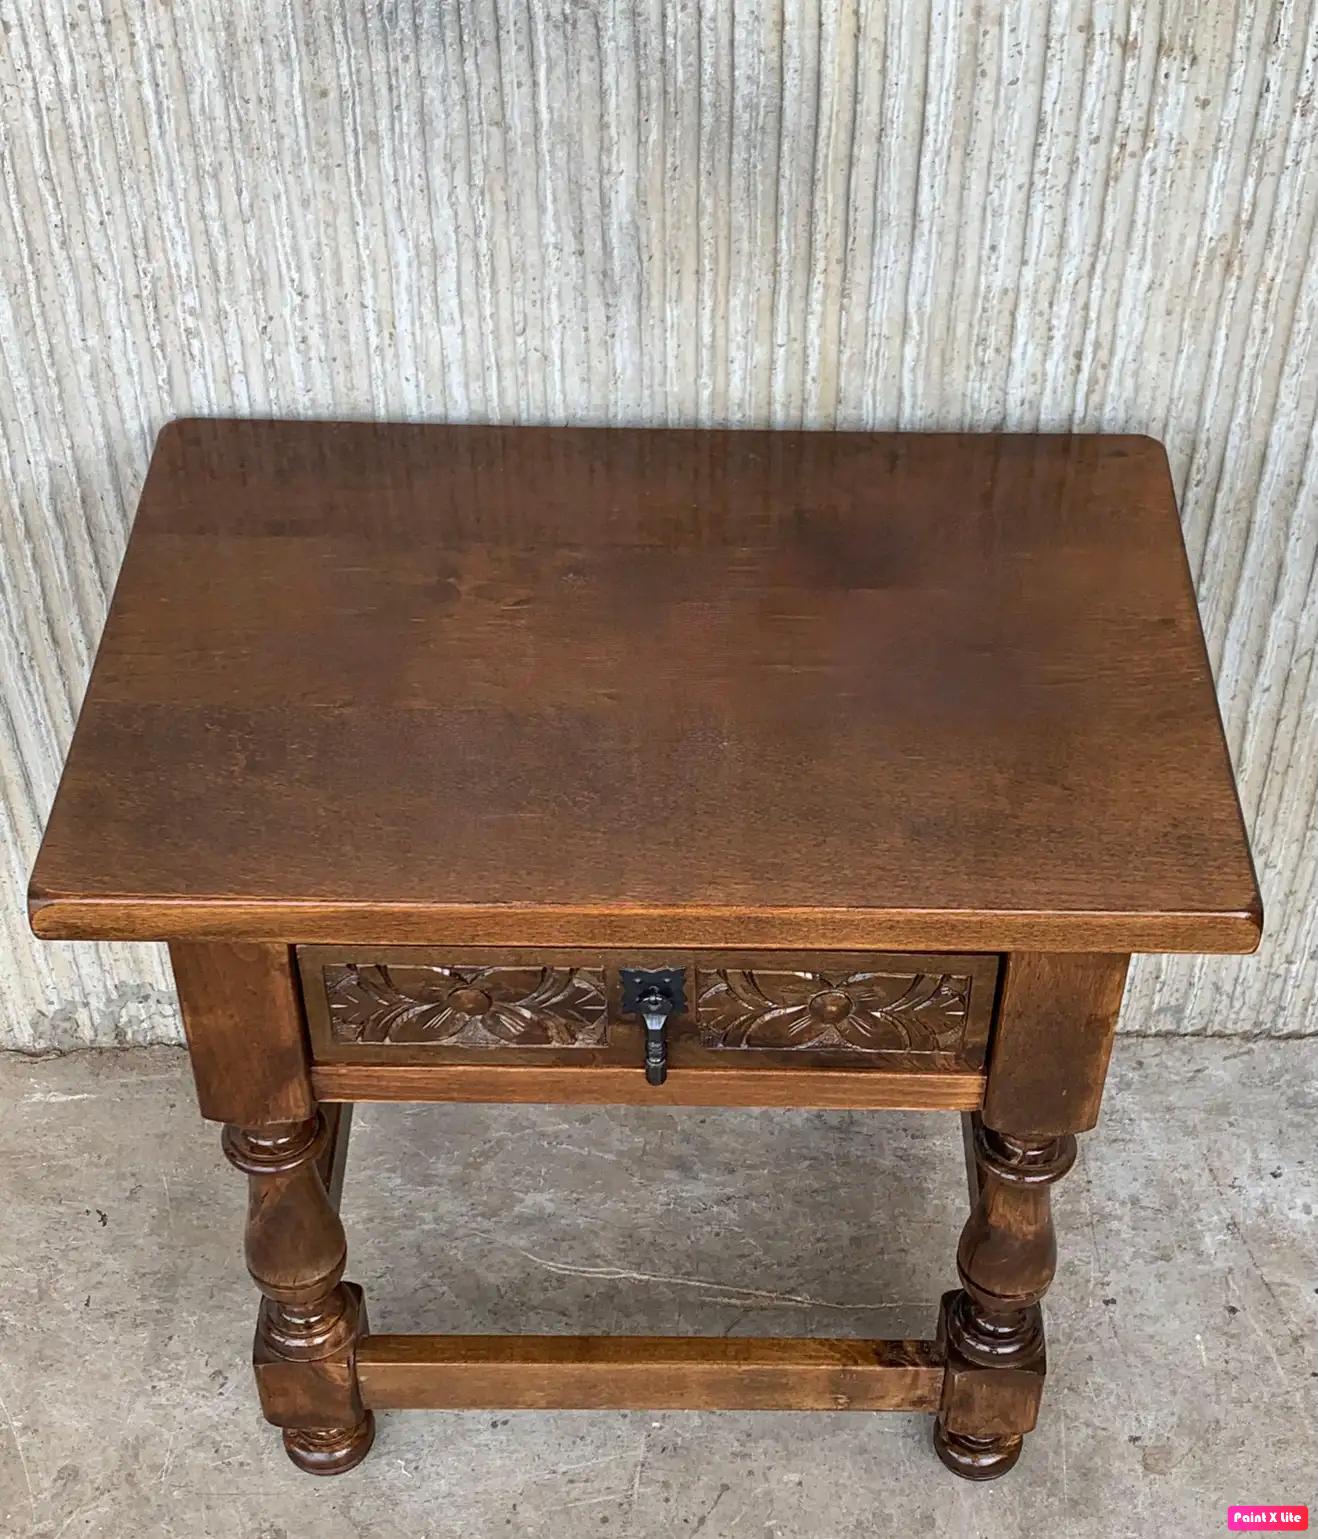 20th century Spanish nightstands in solid walnut with carved drawer and iron hardware.
Beautiful tables that you can use like a nightstands or side tables, end tables, or table lamp.